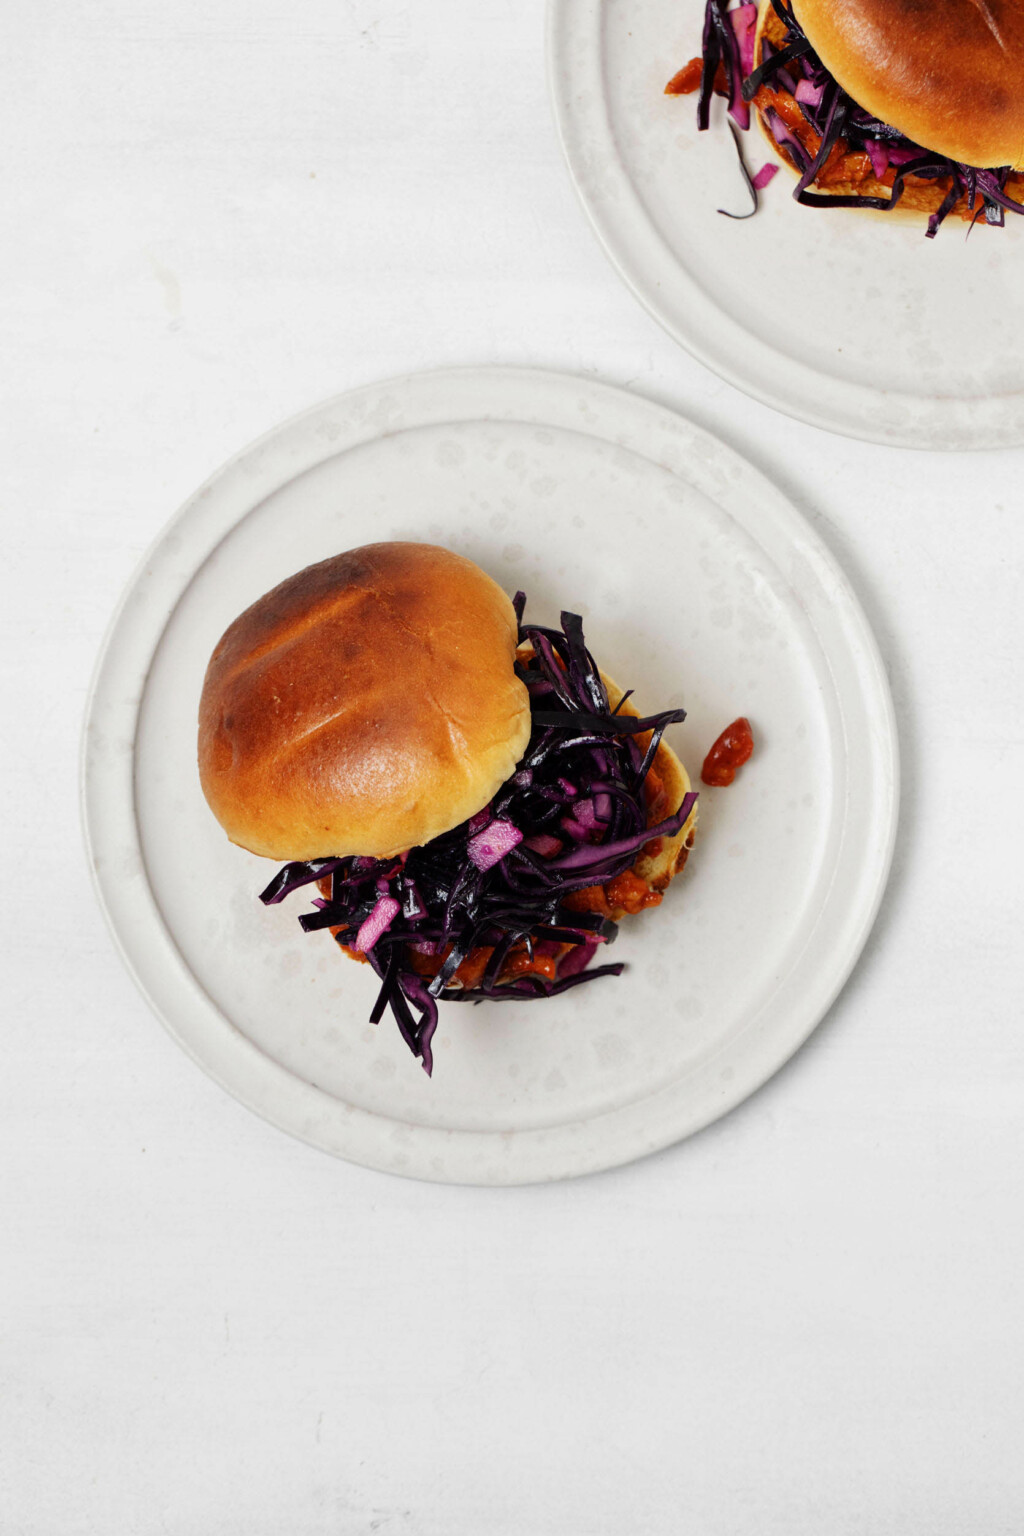 A toasted burger bun is stacked with a red cabbage slaw and a vegan protein. It rests on a round, white plate.